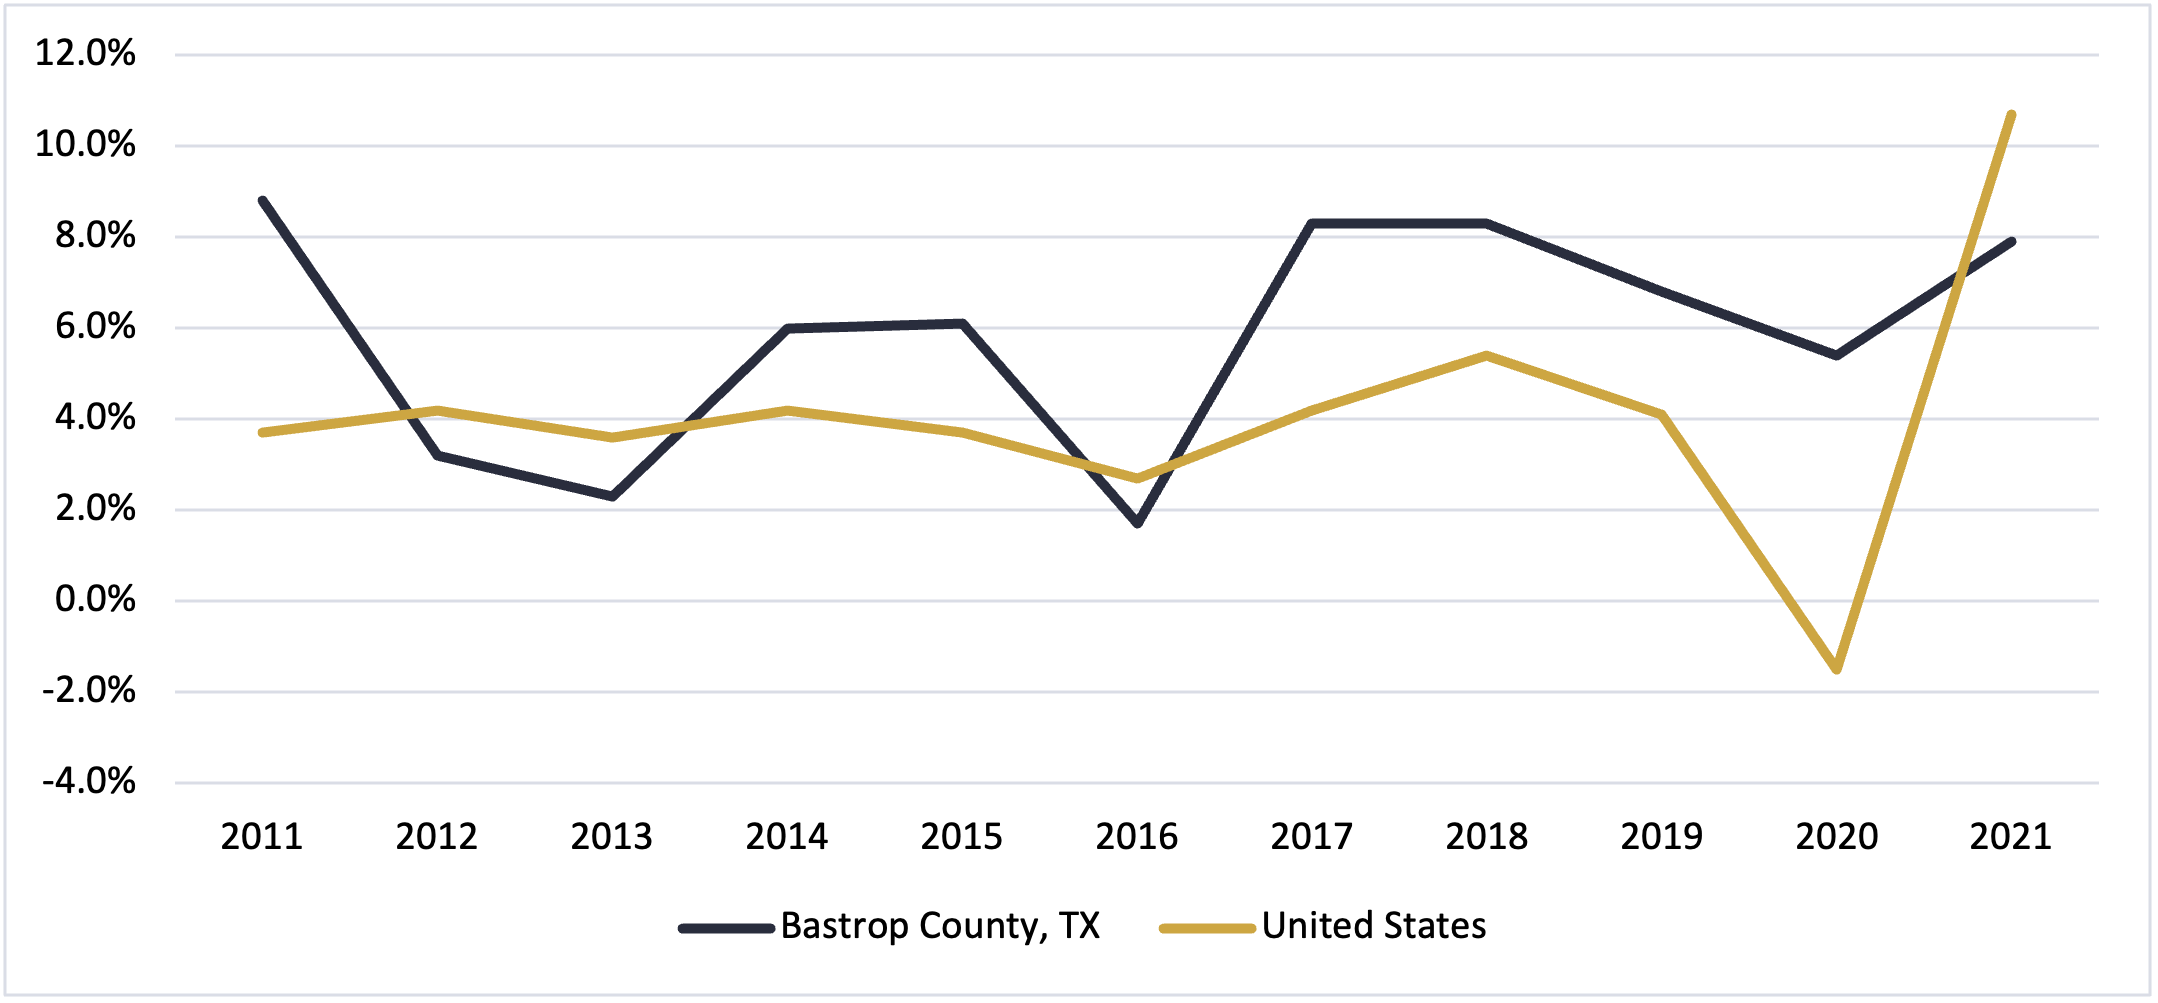 Gross regional product growth in Bastrop county Texas 2021